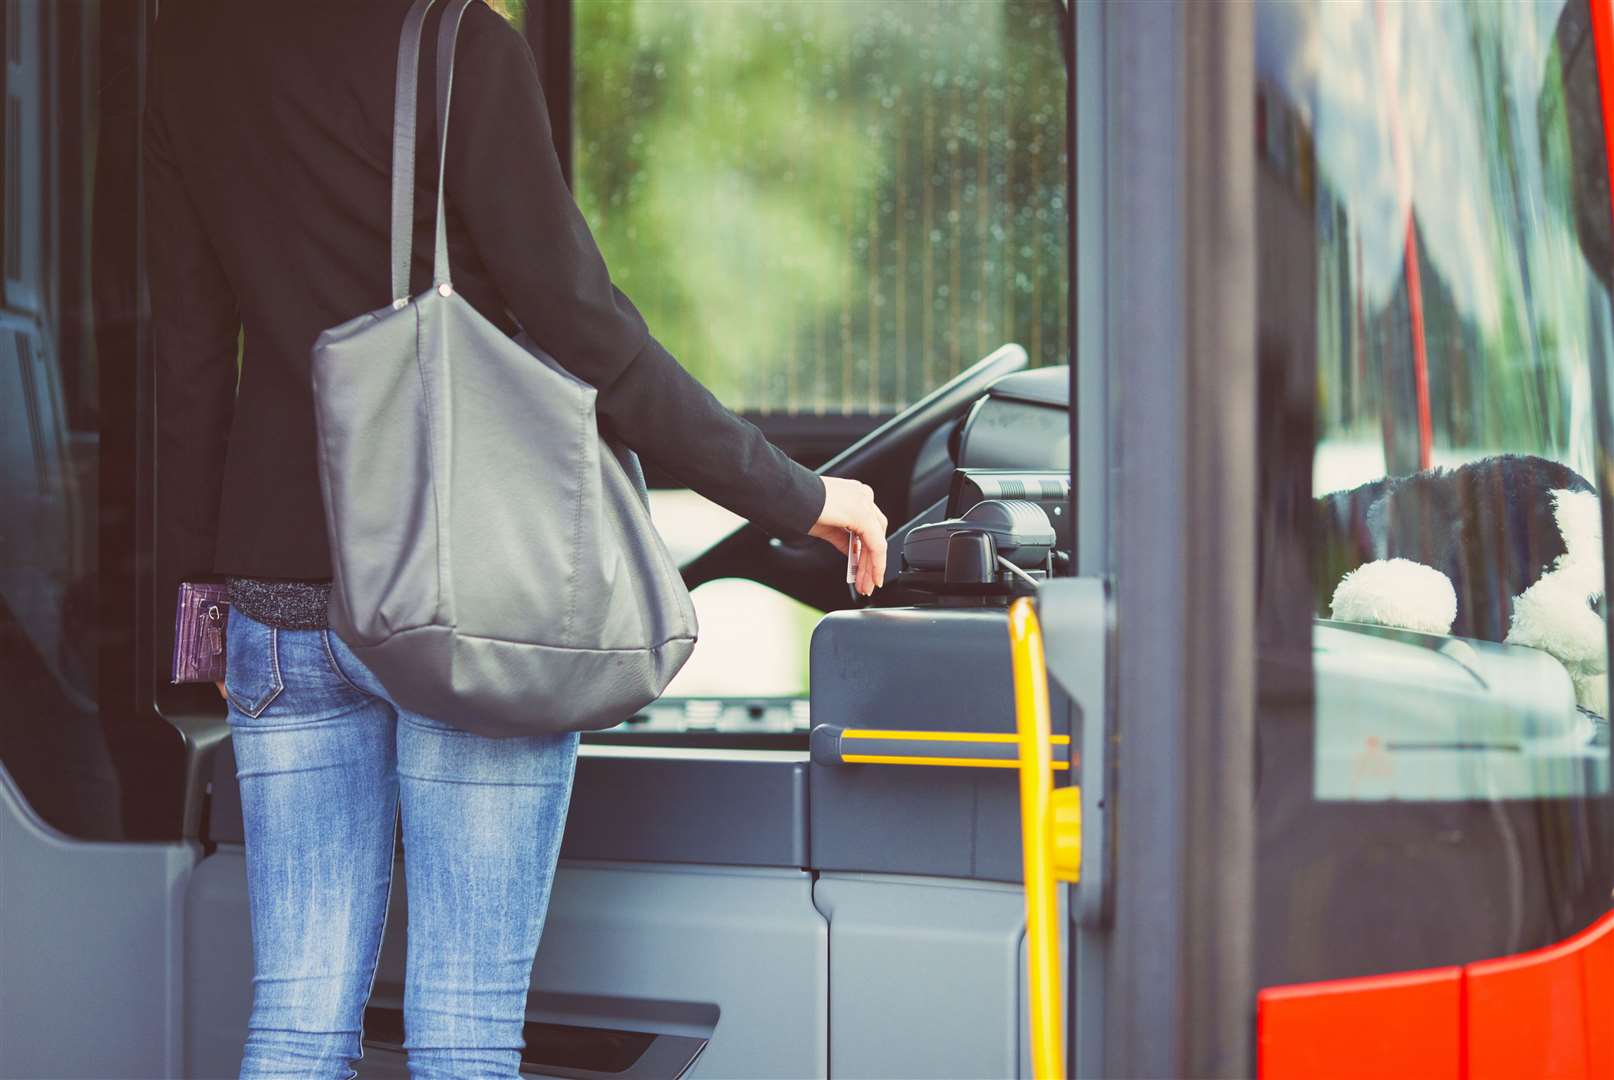 It is hoped the scheme will save passengers money during the cost-of-living crisis and encourage them to use buses more. Image: iStock.